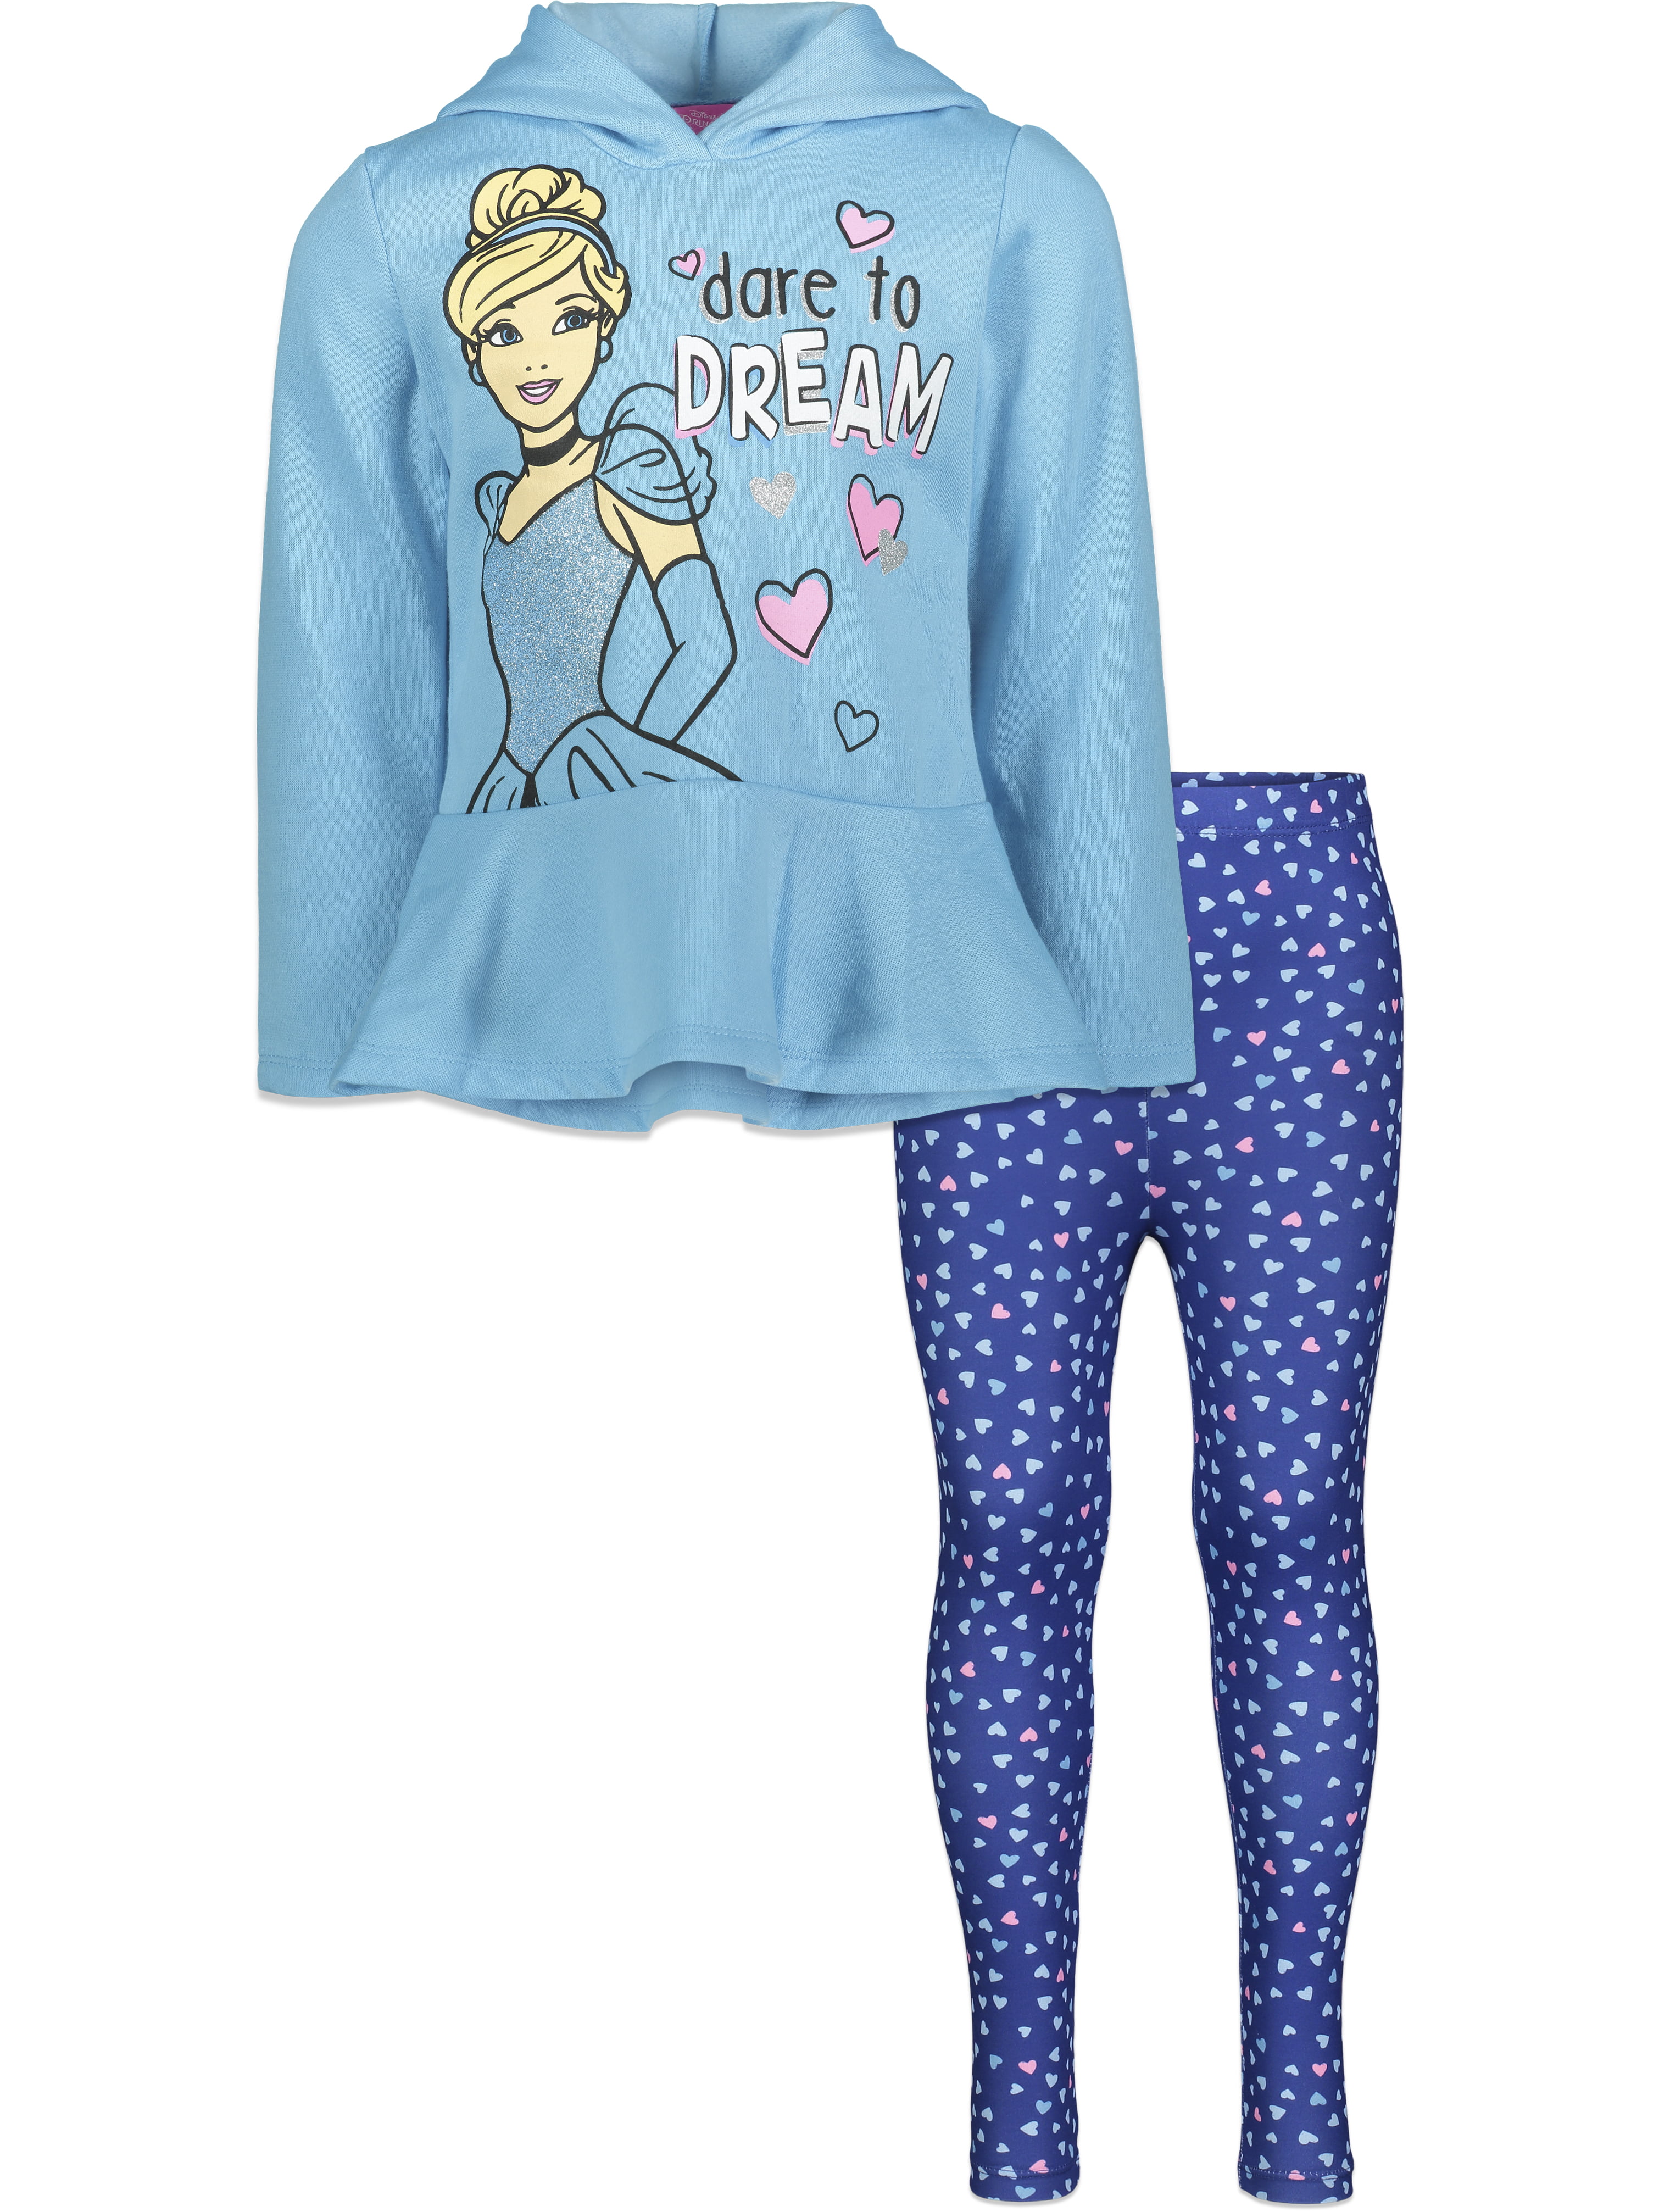 My Little Pony Girls' Blue Pull-Over Hoodie & Legging Set Size 2T 3T 4T 4 5 6 6X 